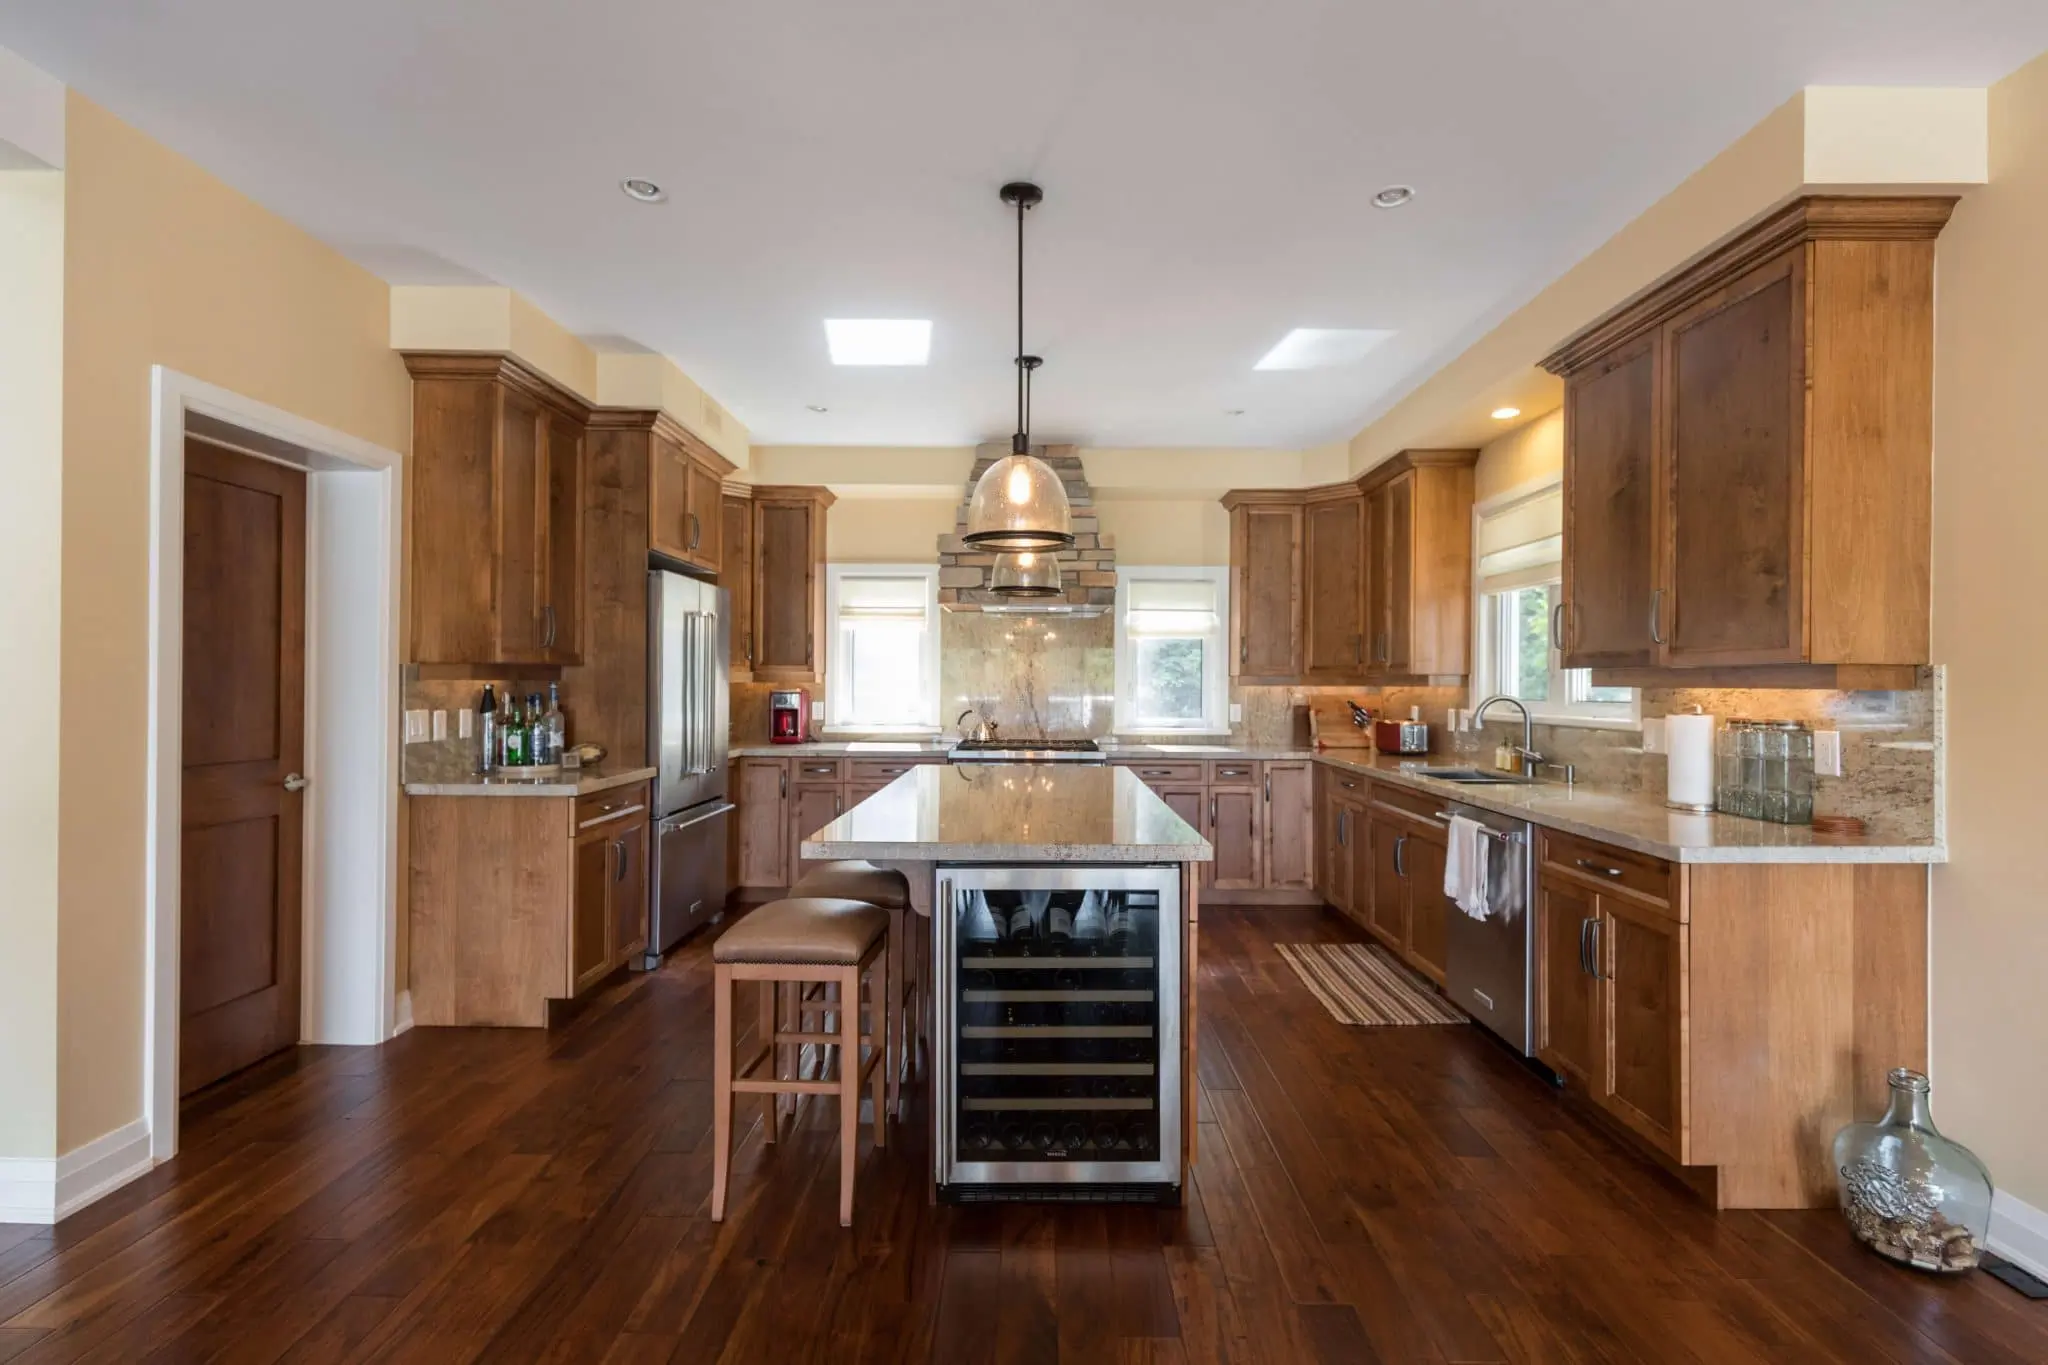 Customizing a Kitchen That Fits Your Lifestyle in a Custom Home